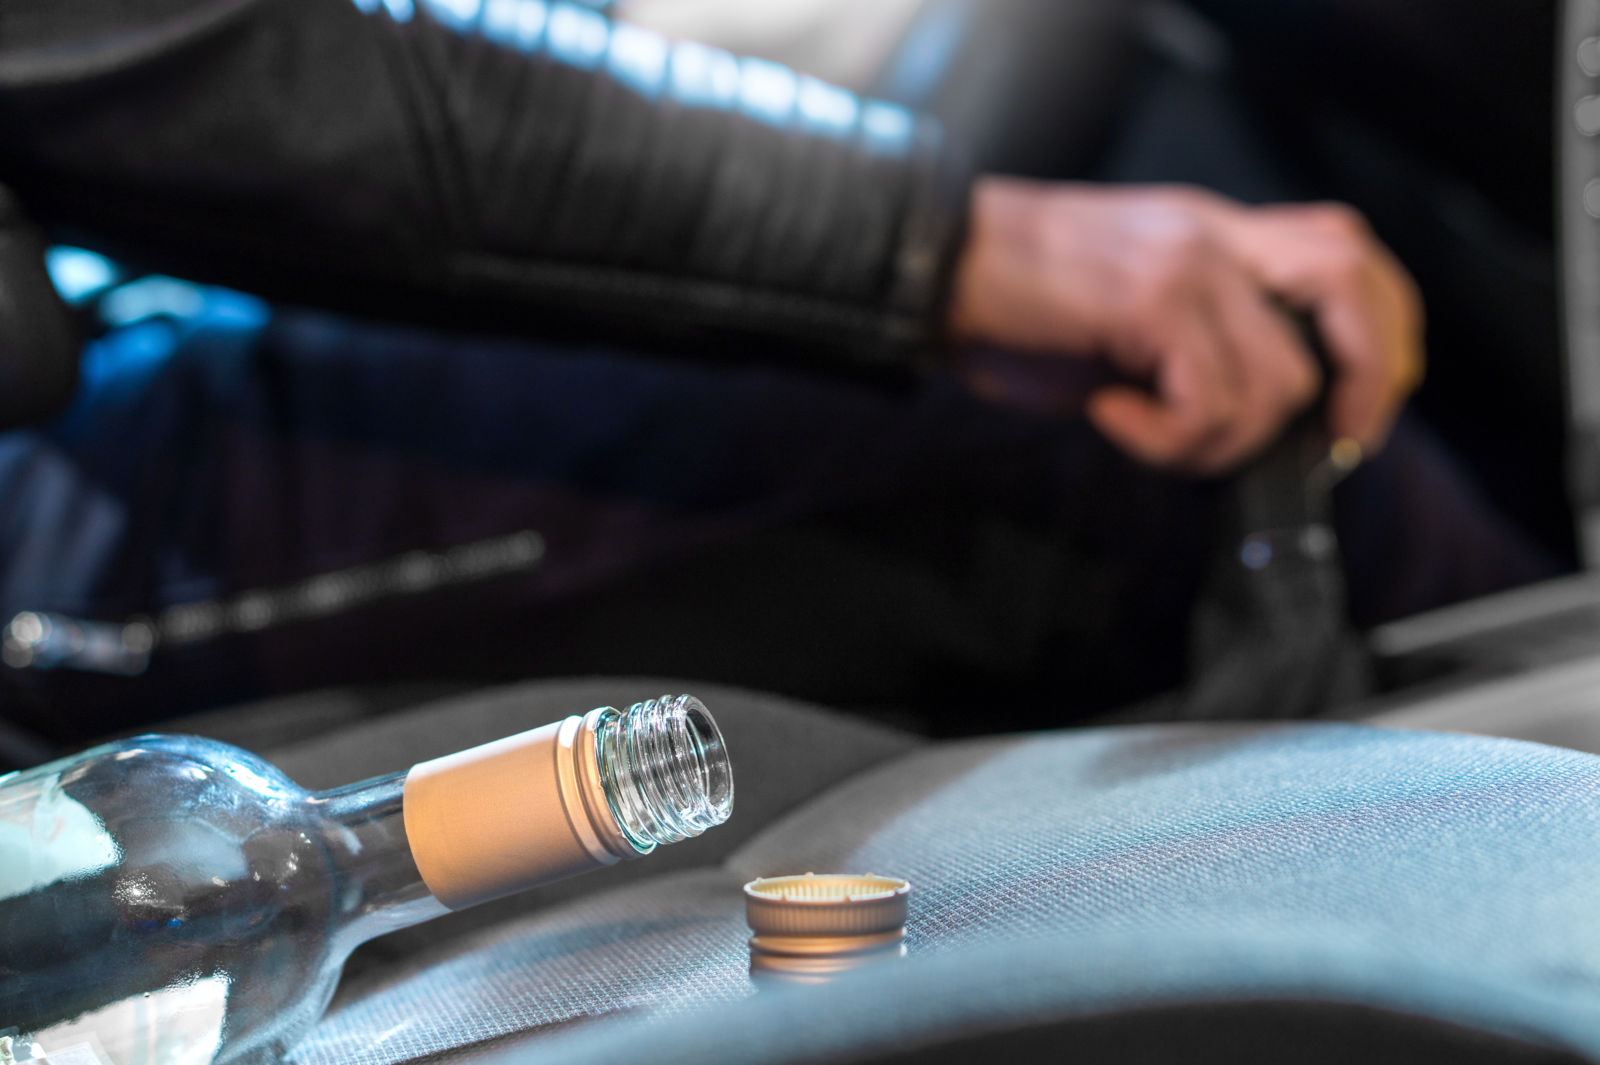 Young man driving car under the influence of alcohol. Hand on gear stick. Close up of empty bottle of wine on front seat. Traffic safety risk.